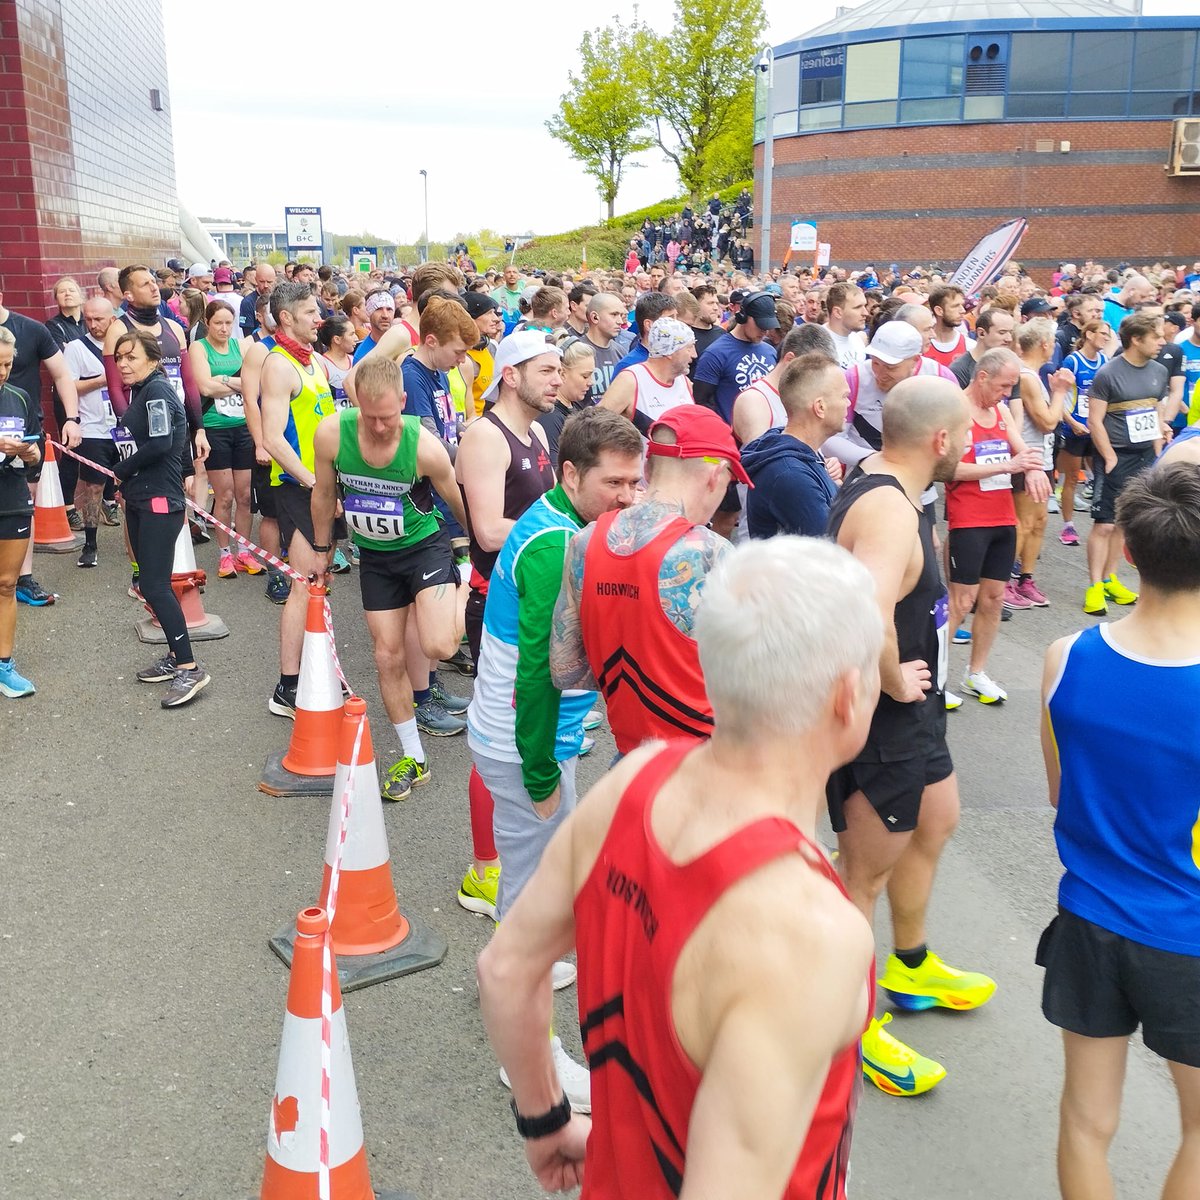 Bolton Wanderers In The Community and Burden Road Runners put on the fantastic #Community10k this weekend in Horwich🏃 Well done to them and all of the participants, especially those representing VCSE organisations. You are all amazing! 💜